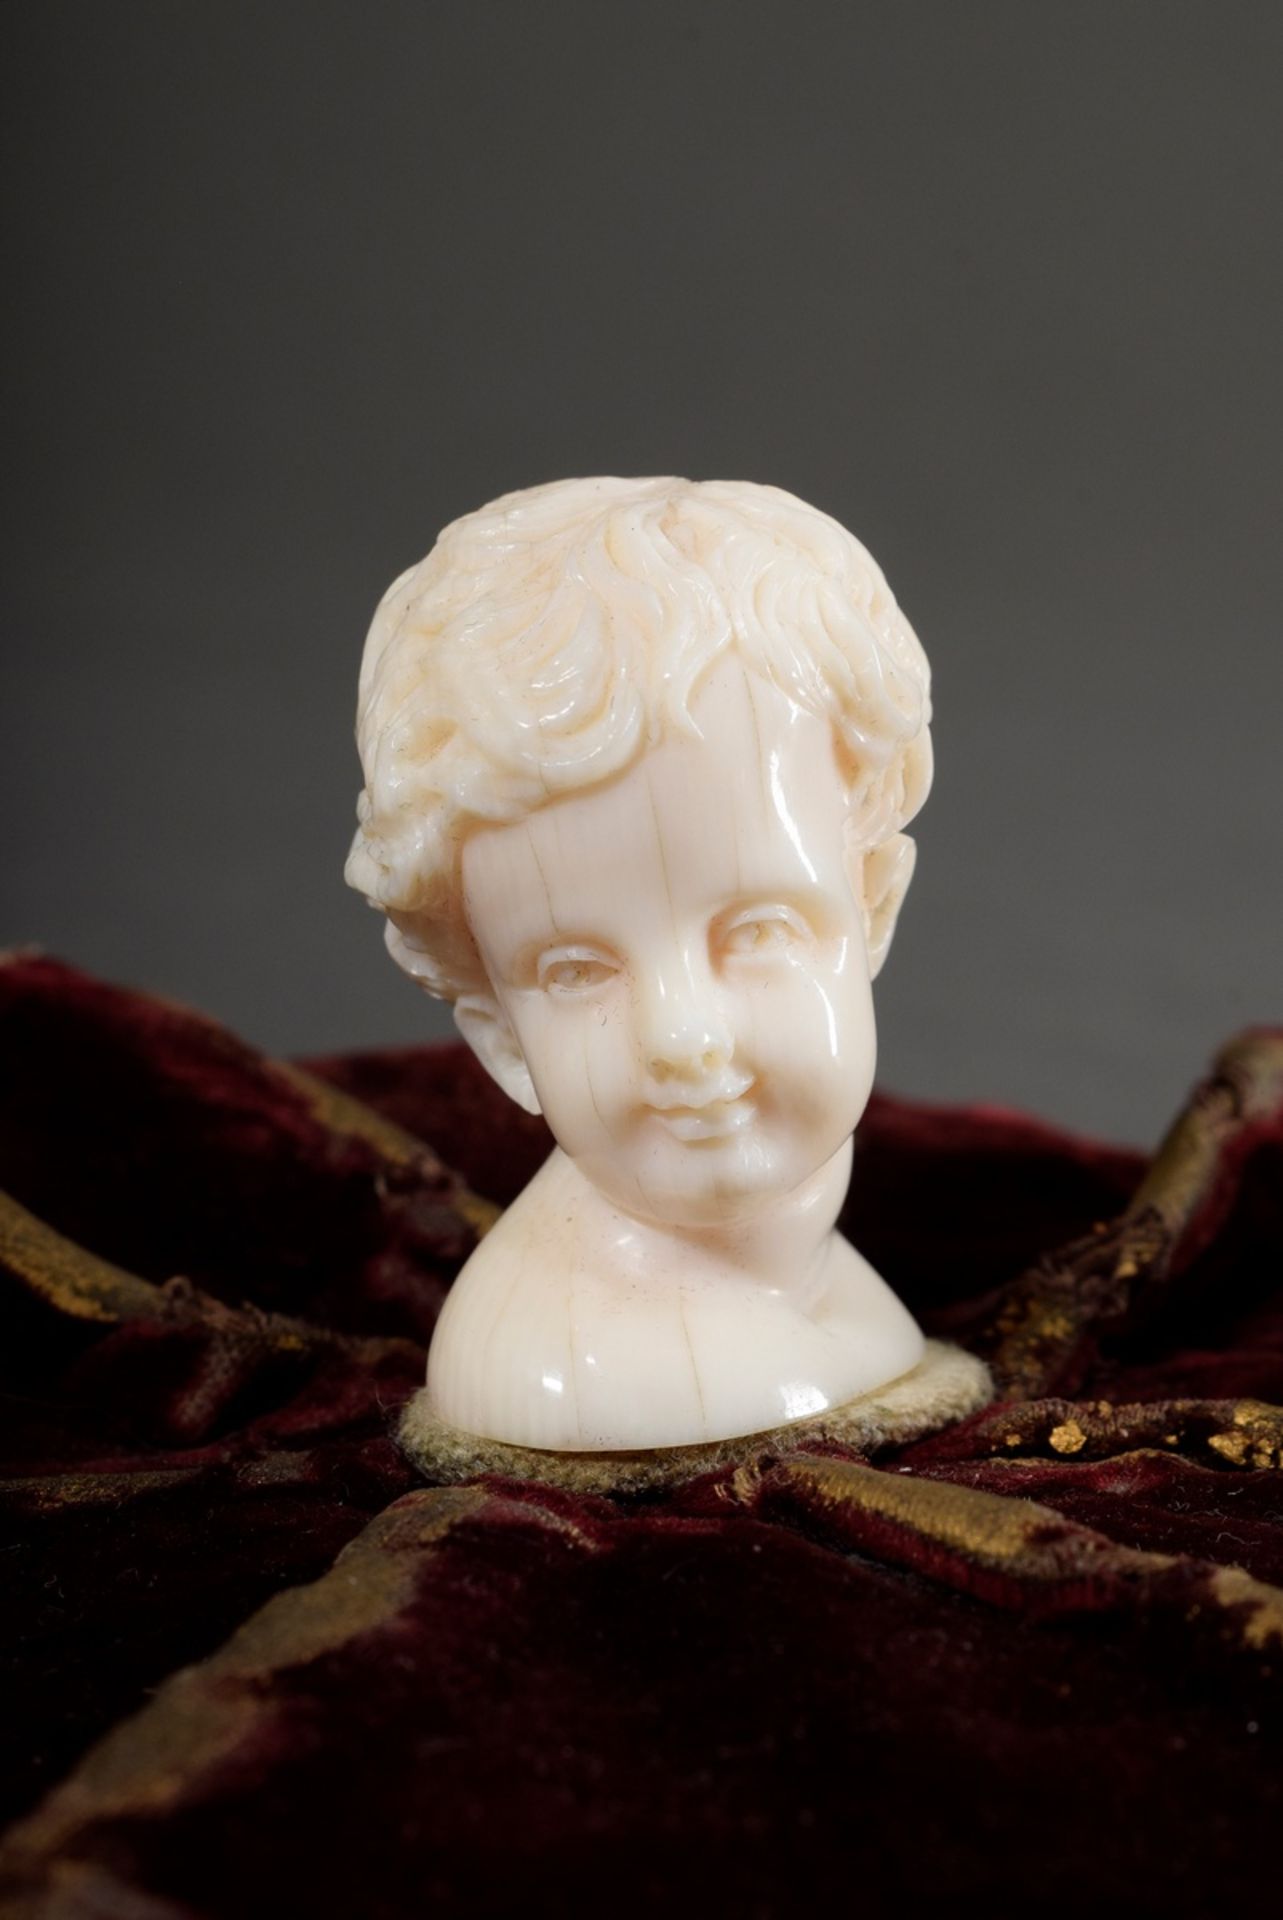 Historism ivory carving "boy's head" mounted on a round red velvet pincushion, end of 19th century, - Image 3 of 5